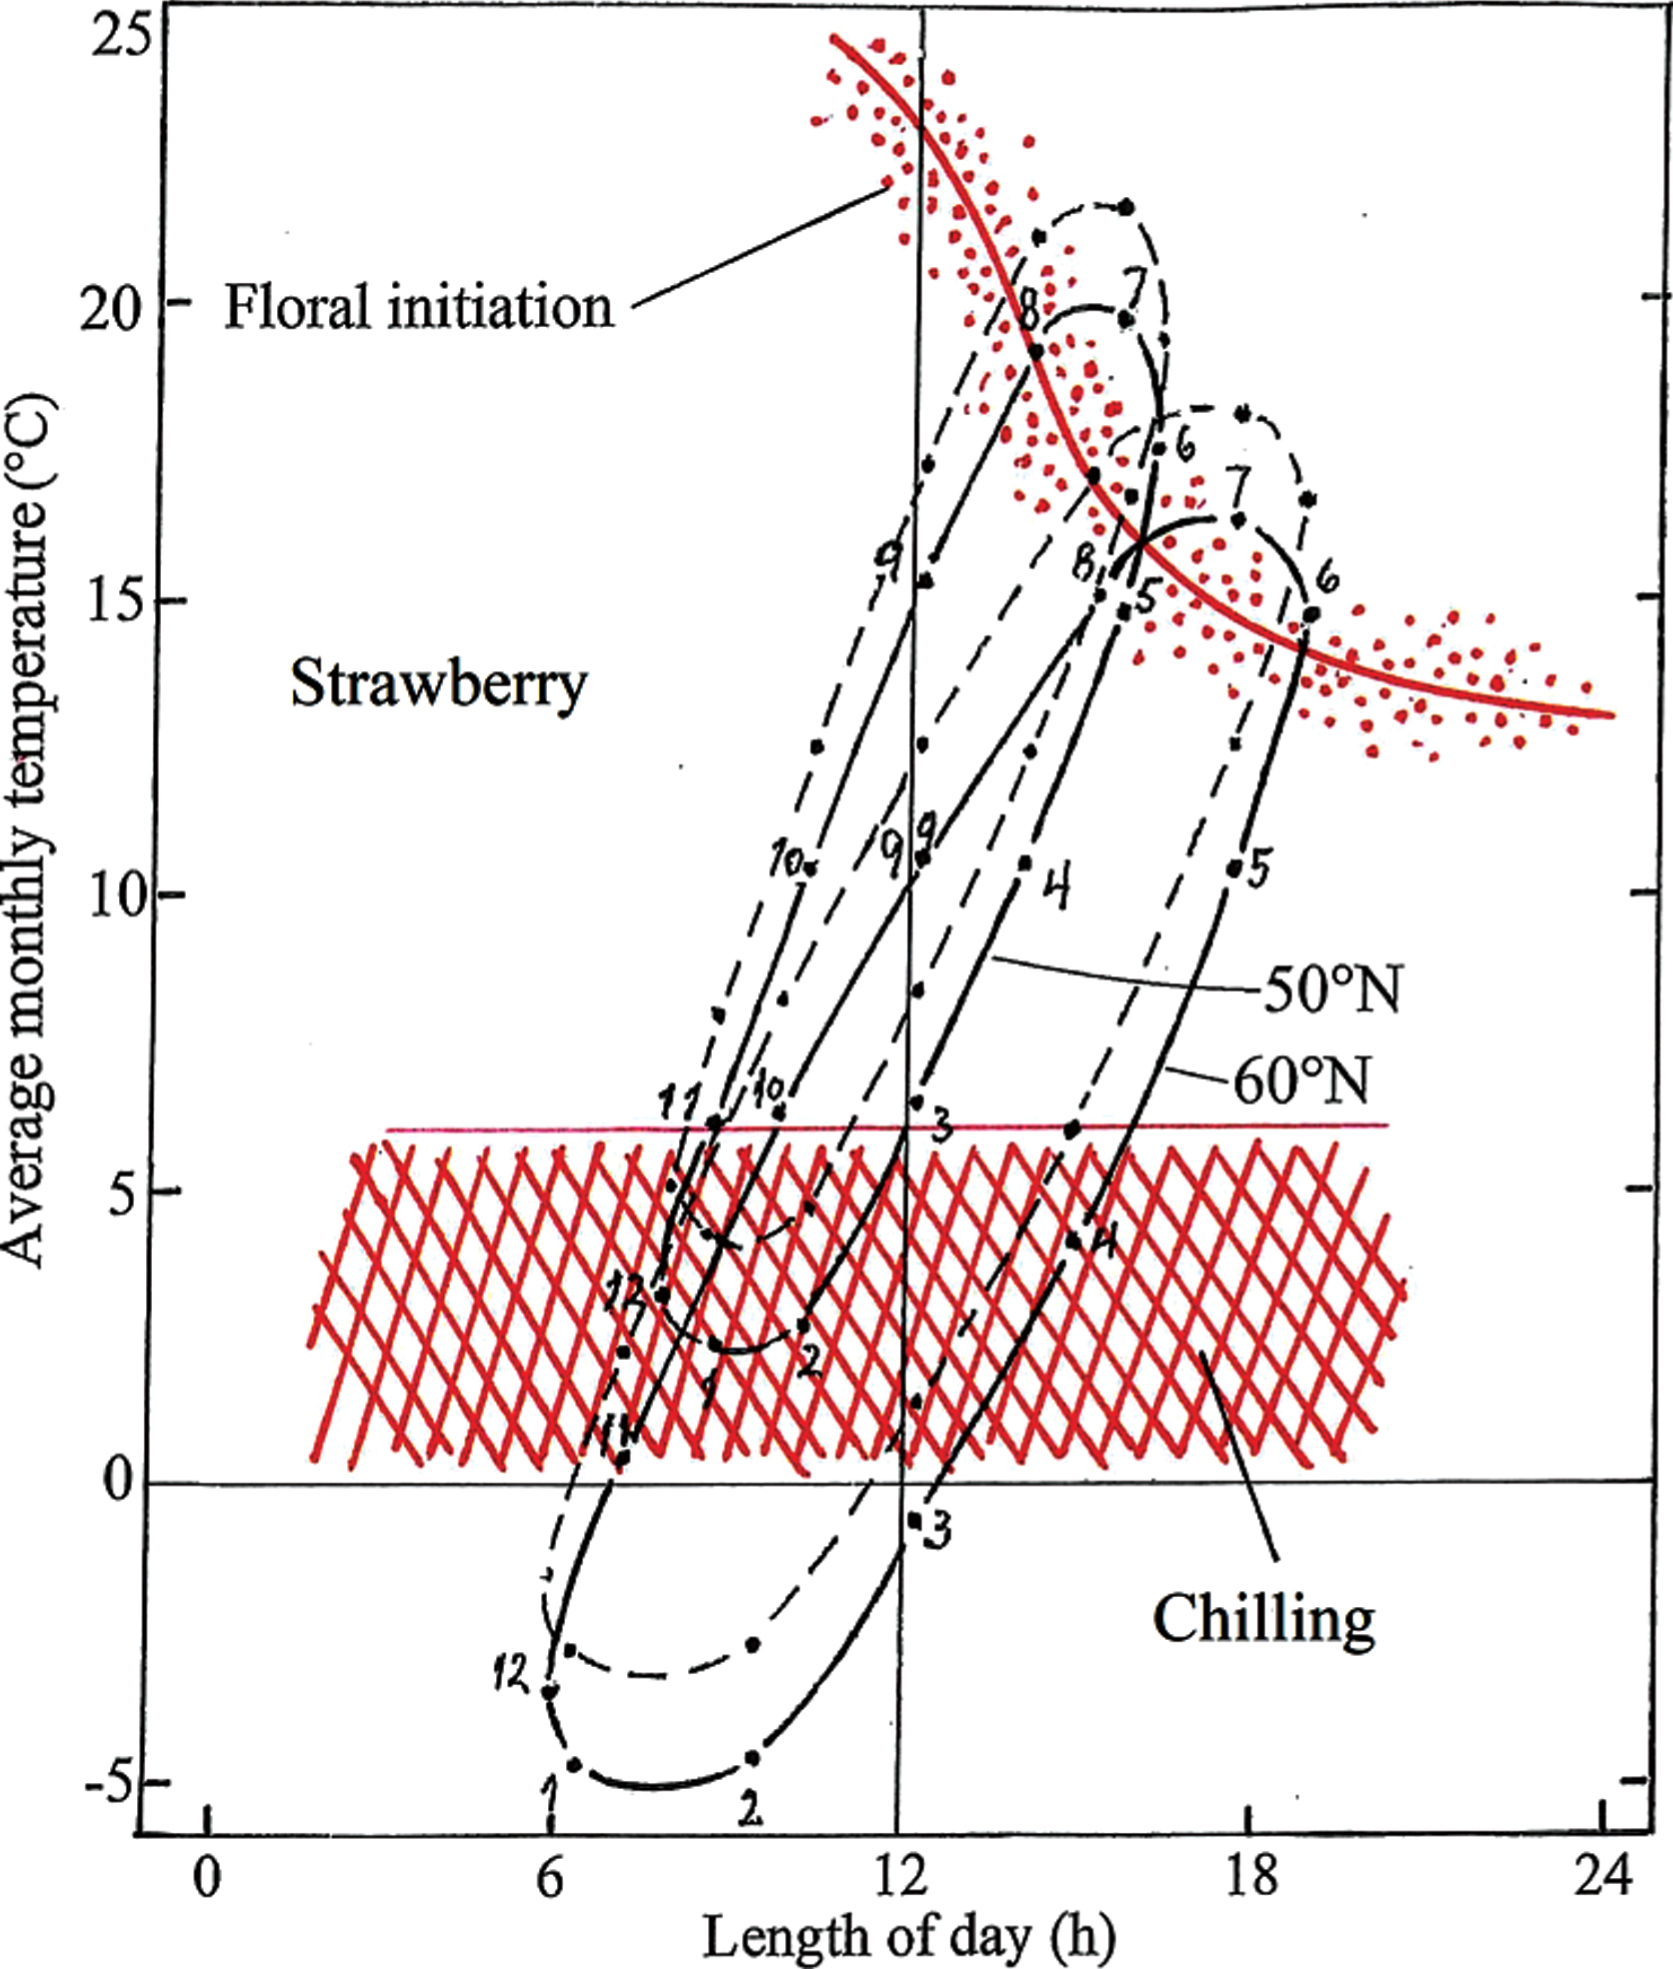 Climate-photothermographs for Ås, Norway (60°N) and Geisenheim, Germany (50°N) together with critical response curves for floral initiation and release from winter dormancy in seasonal-flowering (non-everbearing) strawberry. For illustration of the consequences of a 2°C warming, stippled graphs with +2°C displacement are also presented for each of the two locations. Numbers denote the months of the year.